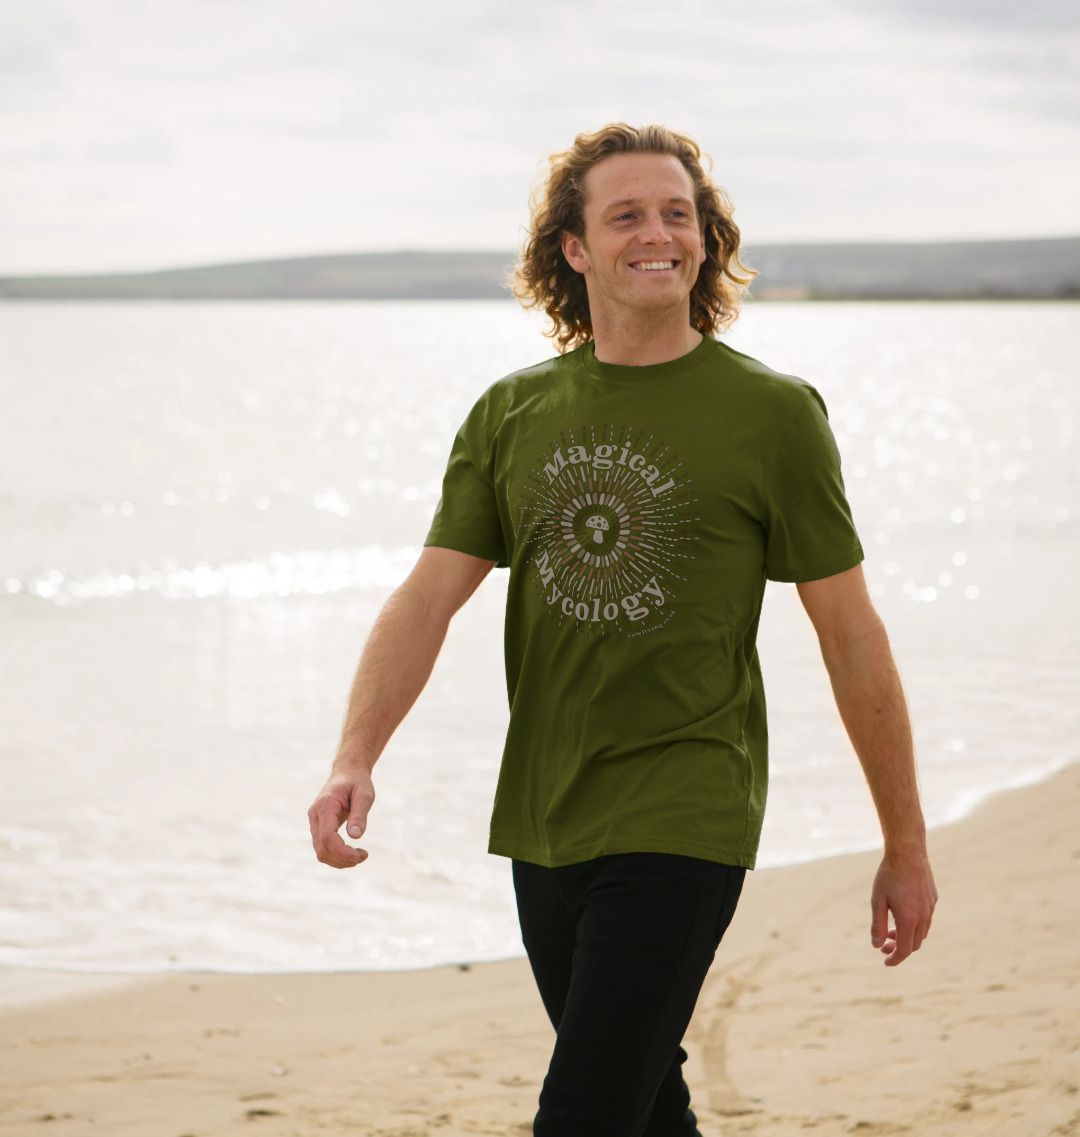 Moss Green Men&#39;s Organic Cotton T-shirt - Magical Mycology | Men&#39;s &#39;Magical Mycology&#39; T-Shirt available in sizes S-XXL and in two colourways, Moss Green and Black.